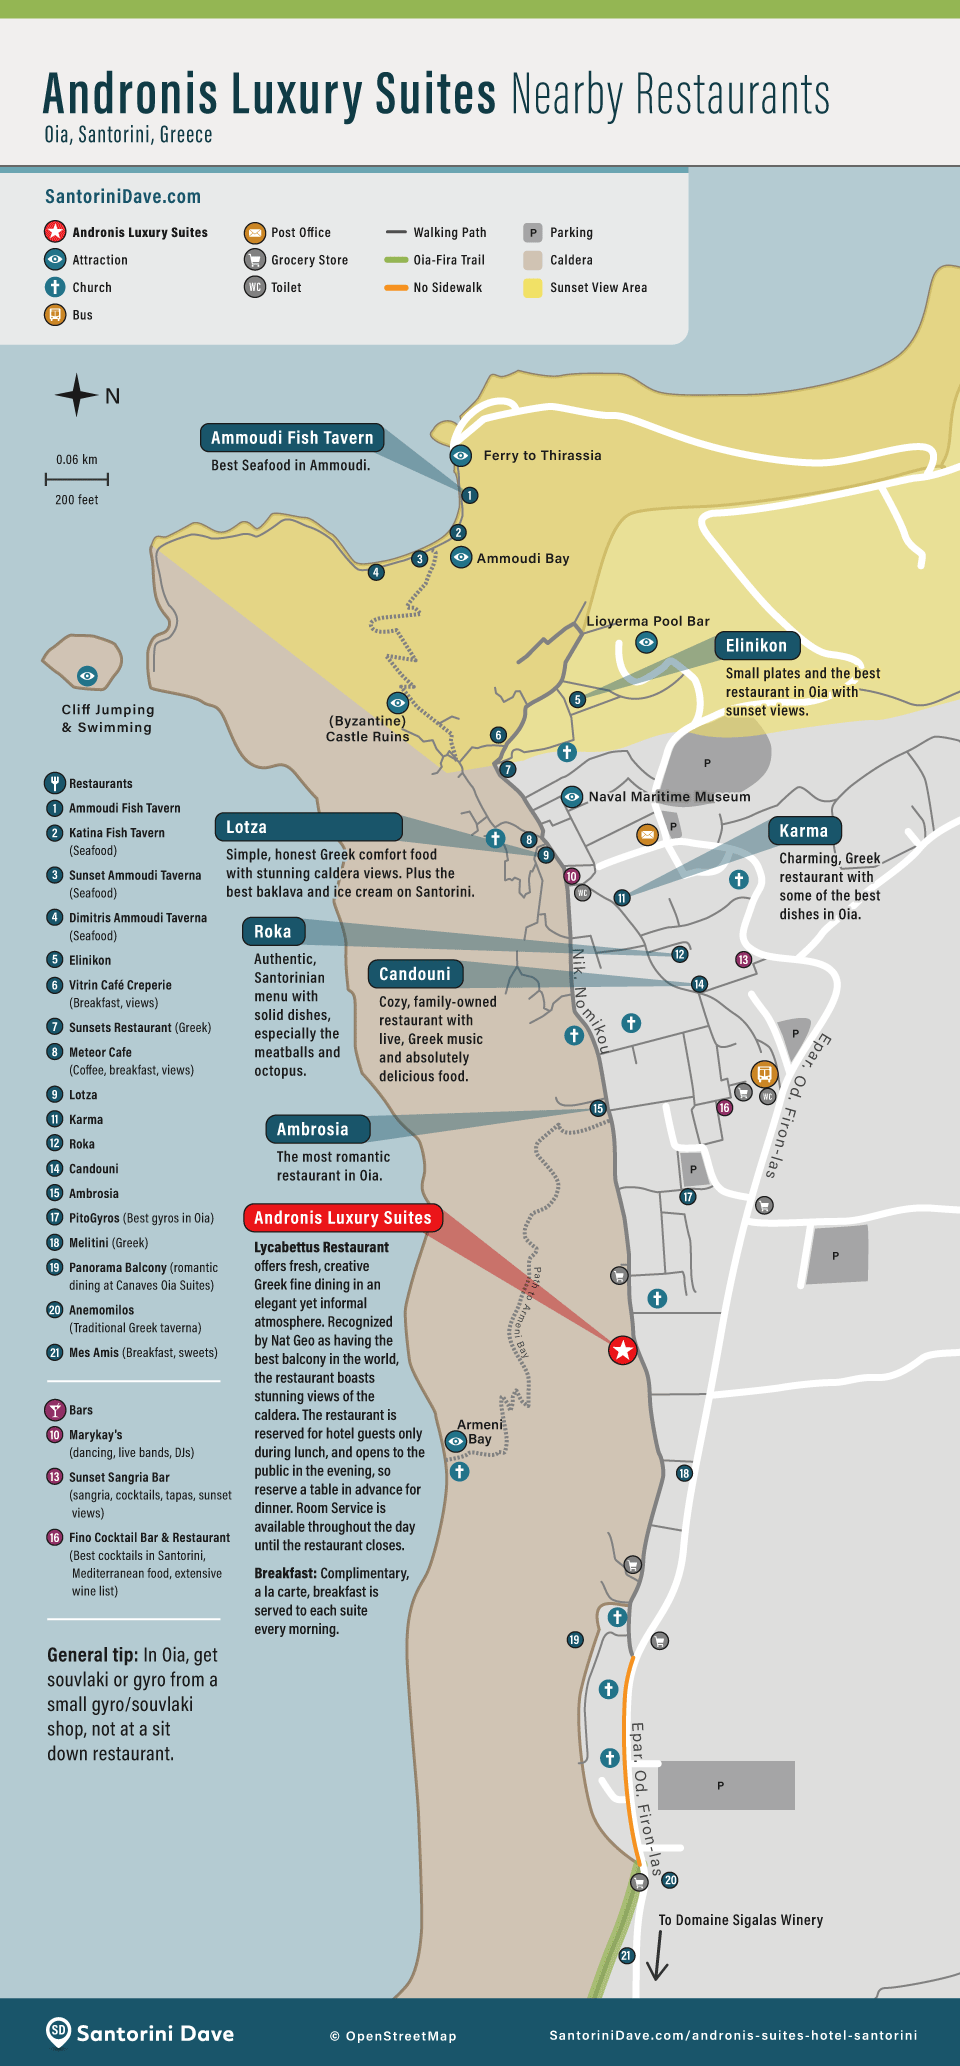 Map of restaurants near Andronis Luxury Suites.